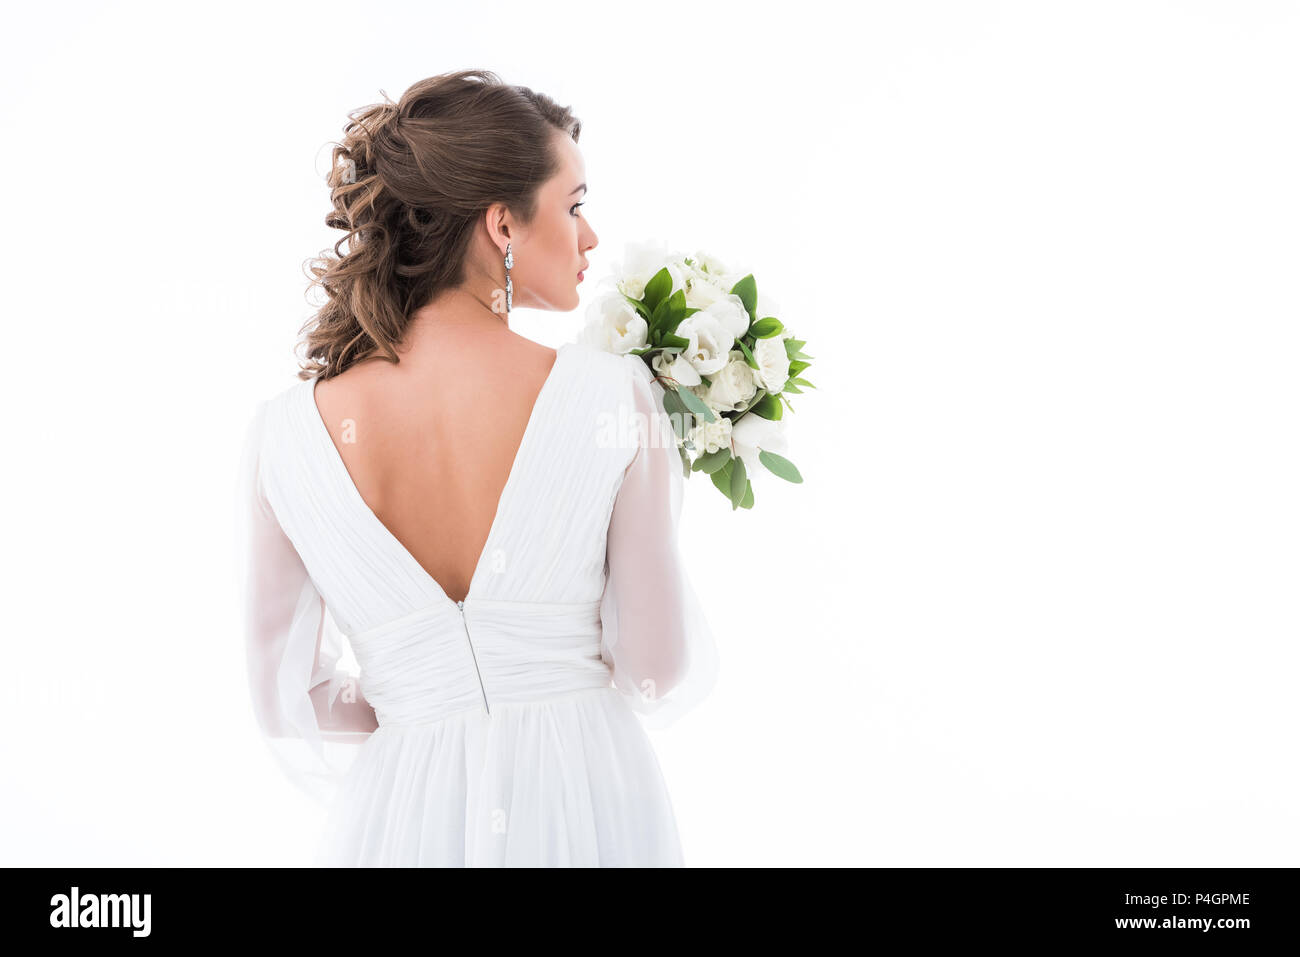 back view of bride in white dress holding wedding bouquet, isolated on white Stock Photo